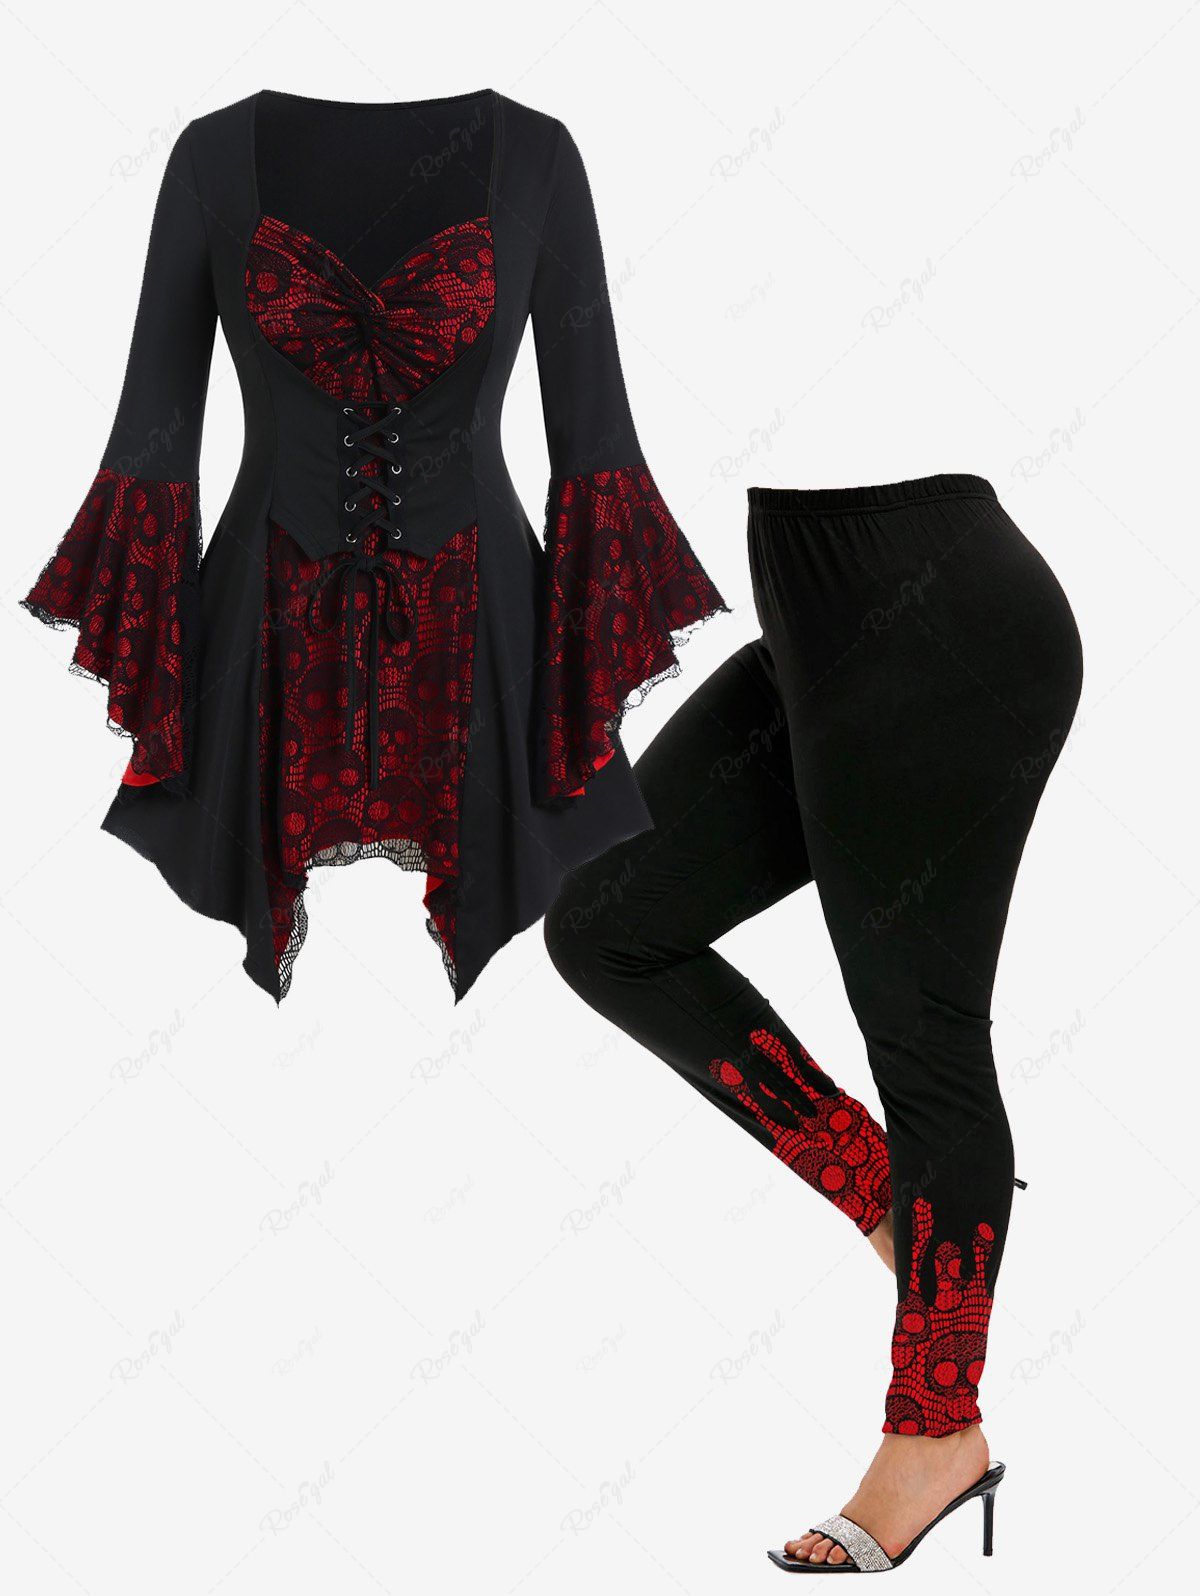 New Bell Sleeve Skull Lace Handkerchief Tee and Gothic Skull Lace Print Skinny Leggings Outfit  